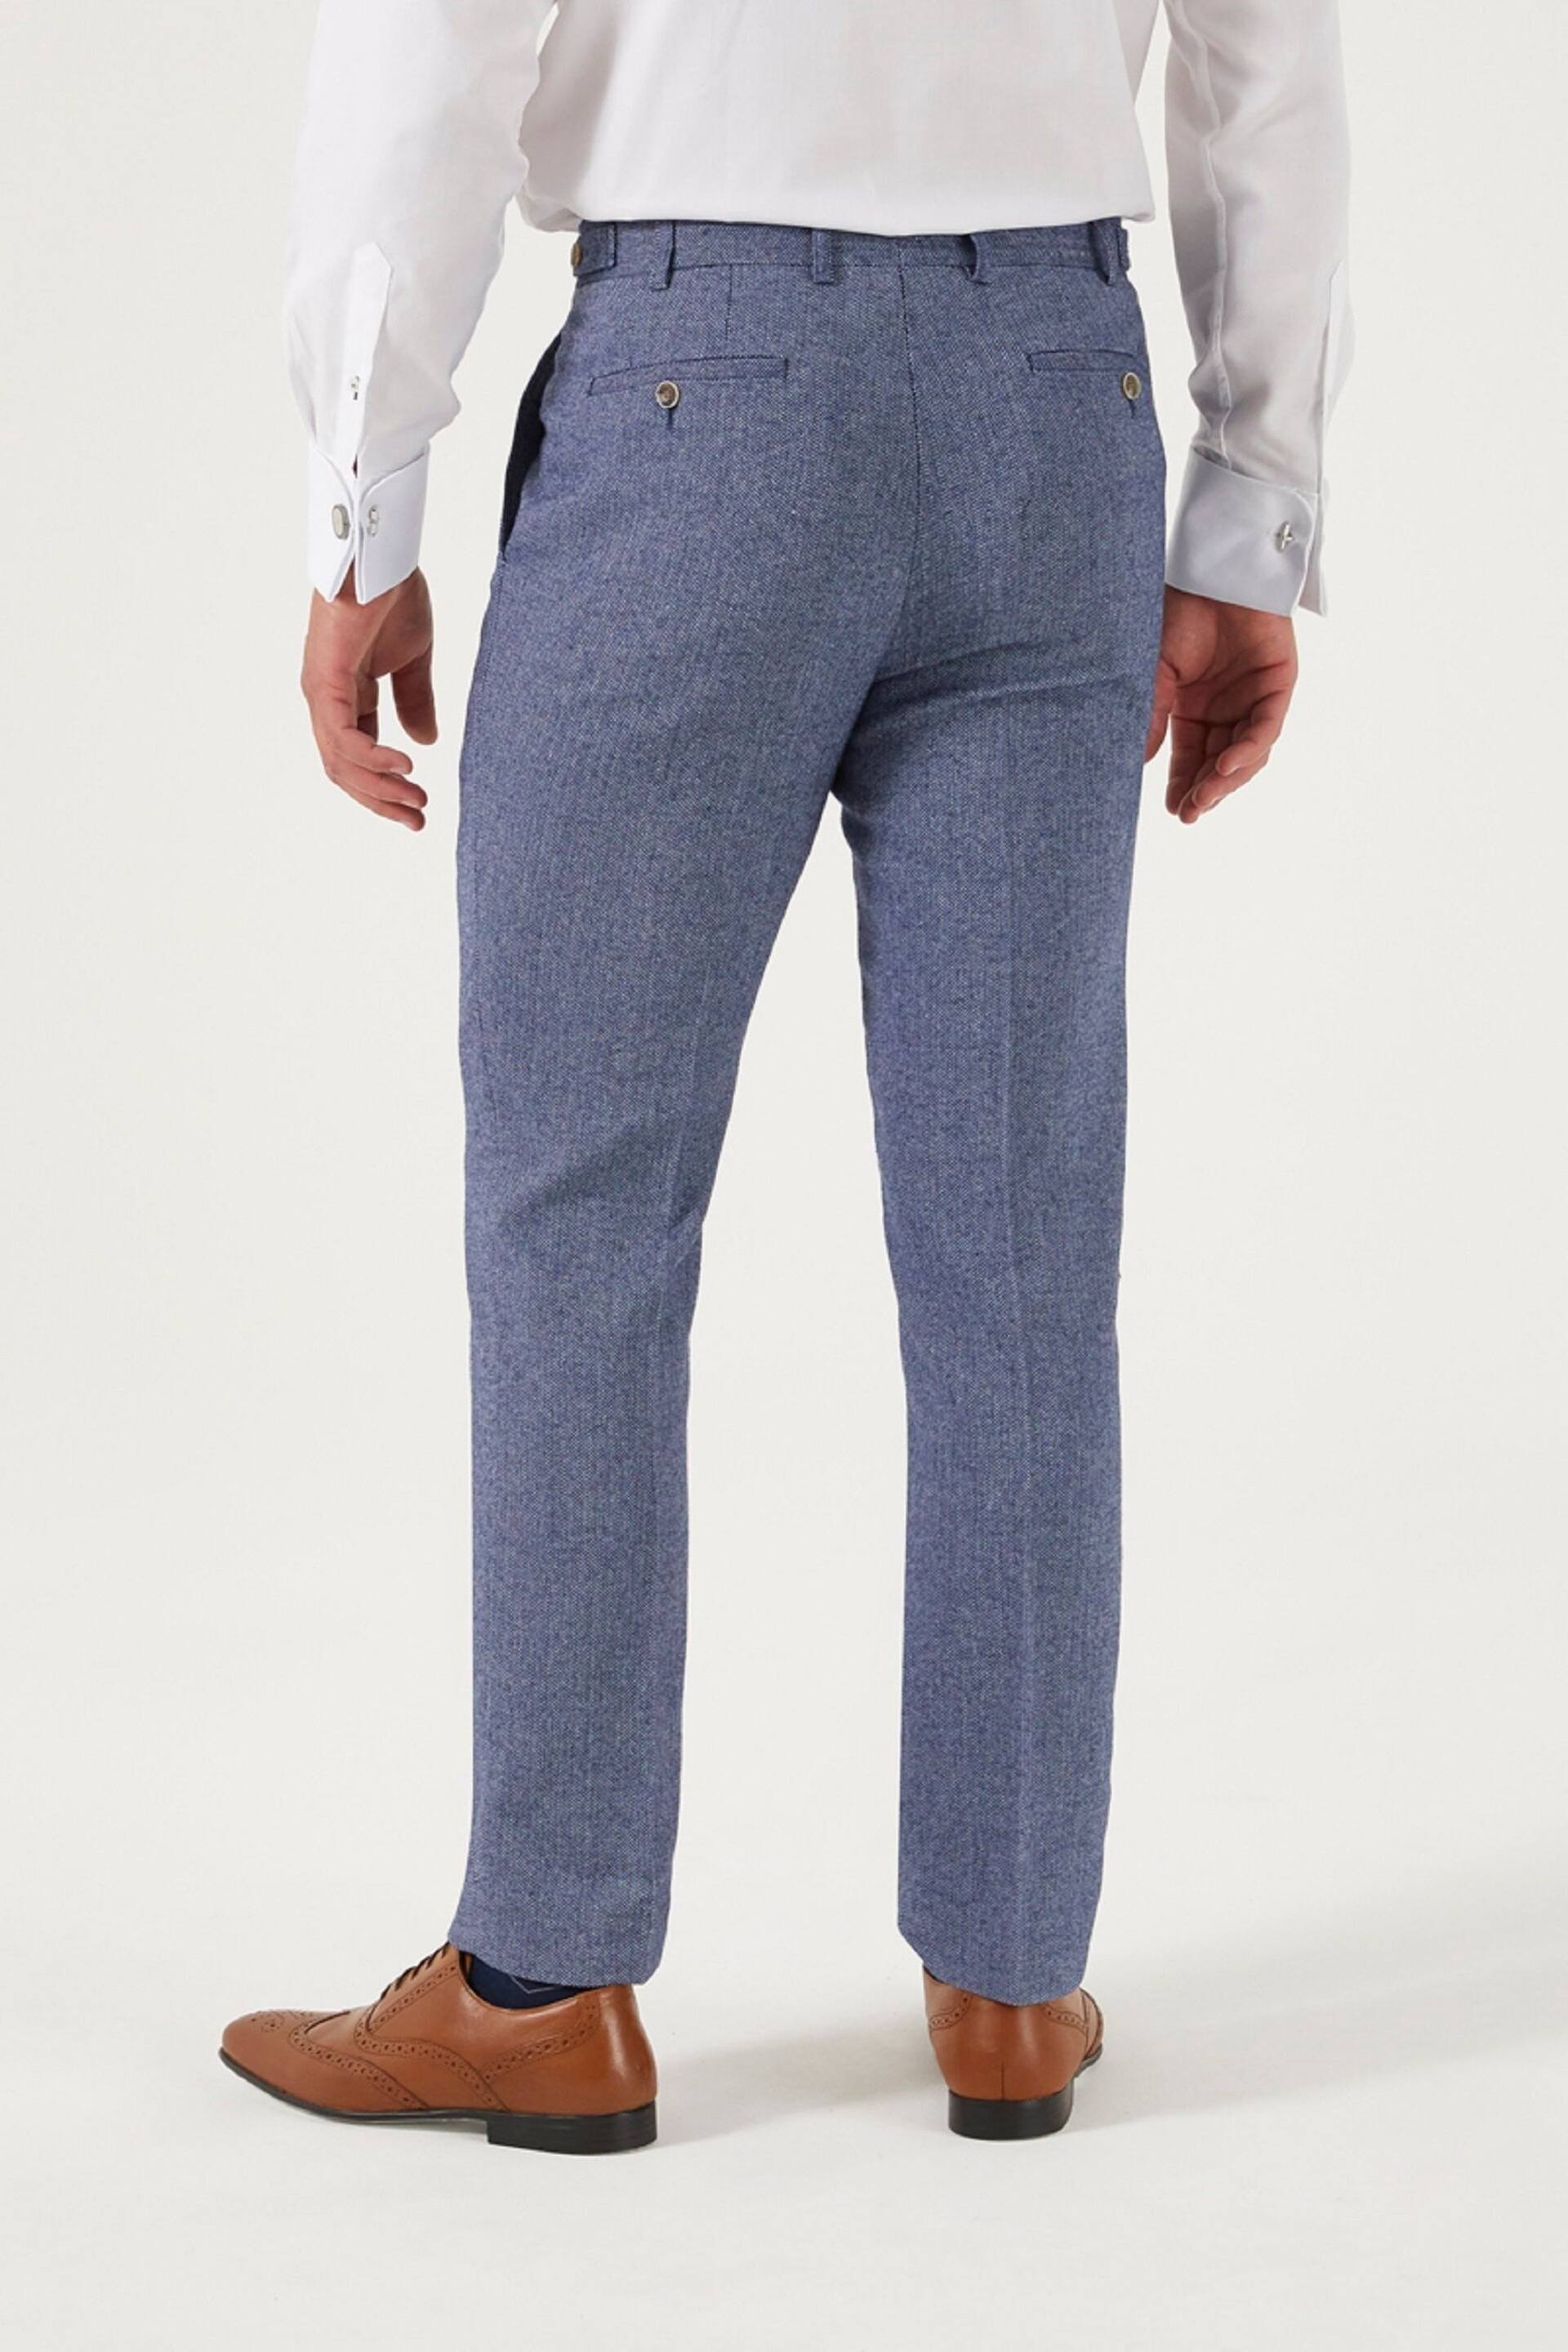 Skopes Jude Tweed Tailored Fit Suit Trousers - Image 2 of 4